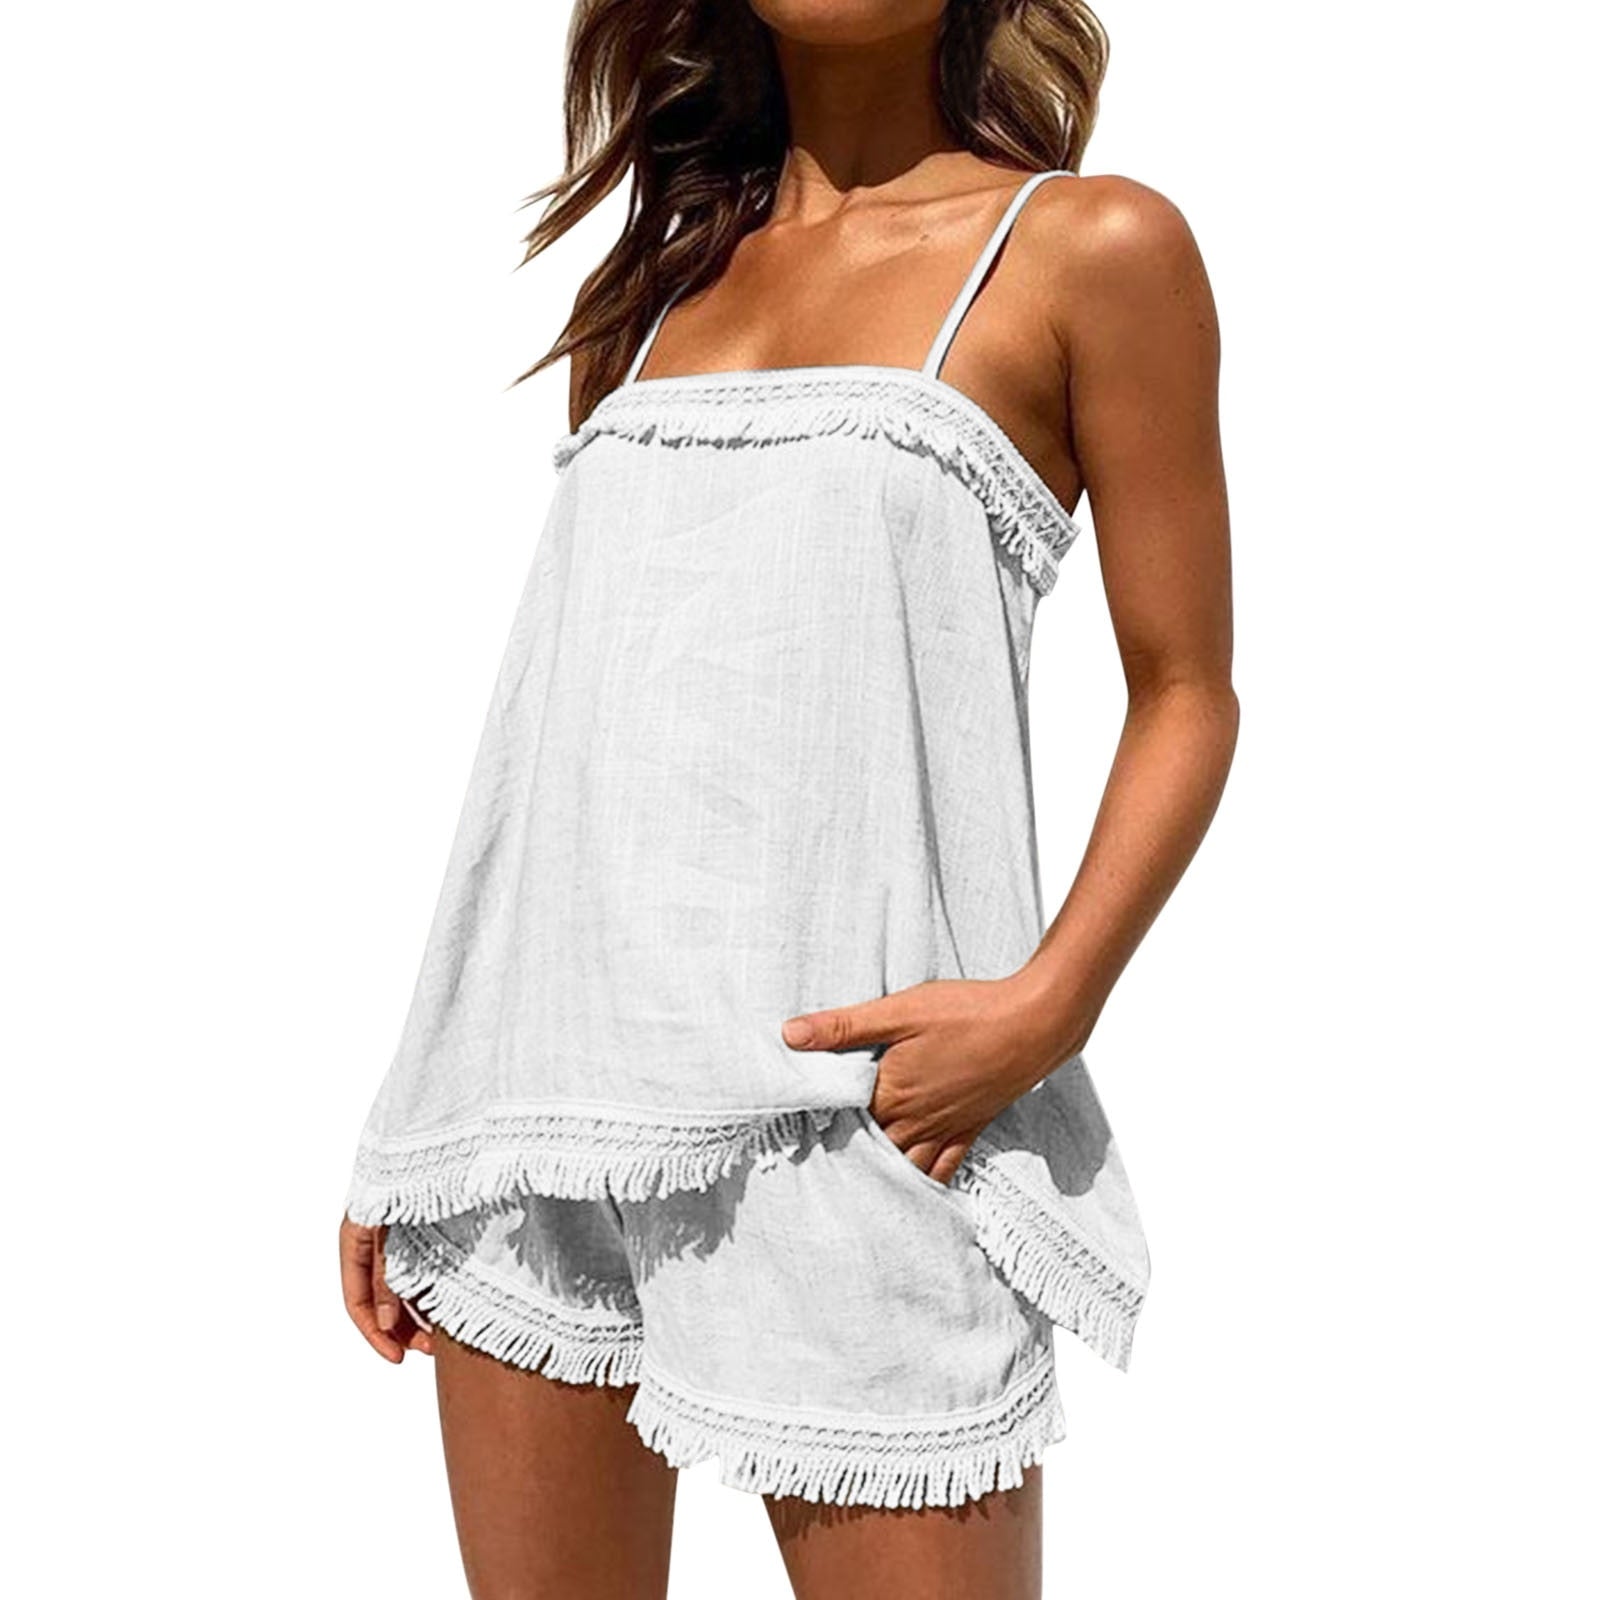 PENERAN Back To School Summer 2 Piece Set Outfits Women Sexy Solid Color Boho Sling Tassel Shorts Sets Ladies Halter Fringe Top Beach Outfits Femme